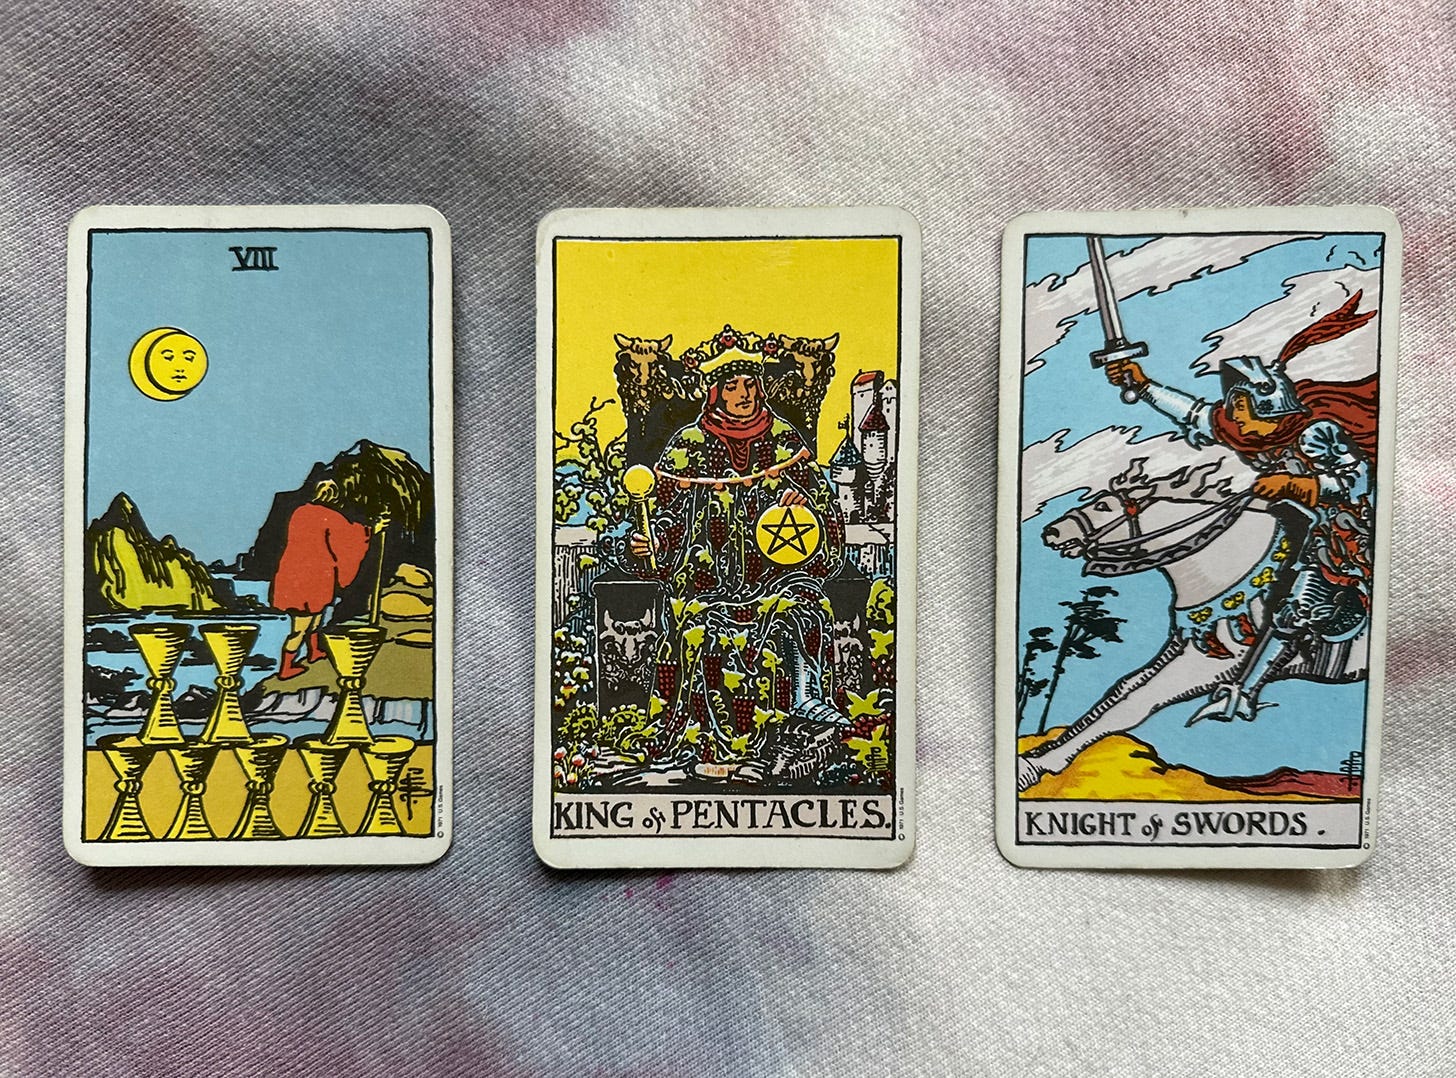 Photo of the Eight of Cups, King of Pentacles, and Knight of Swords